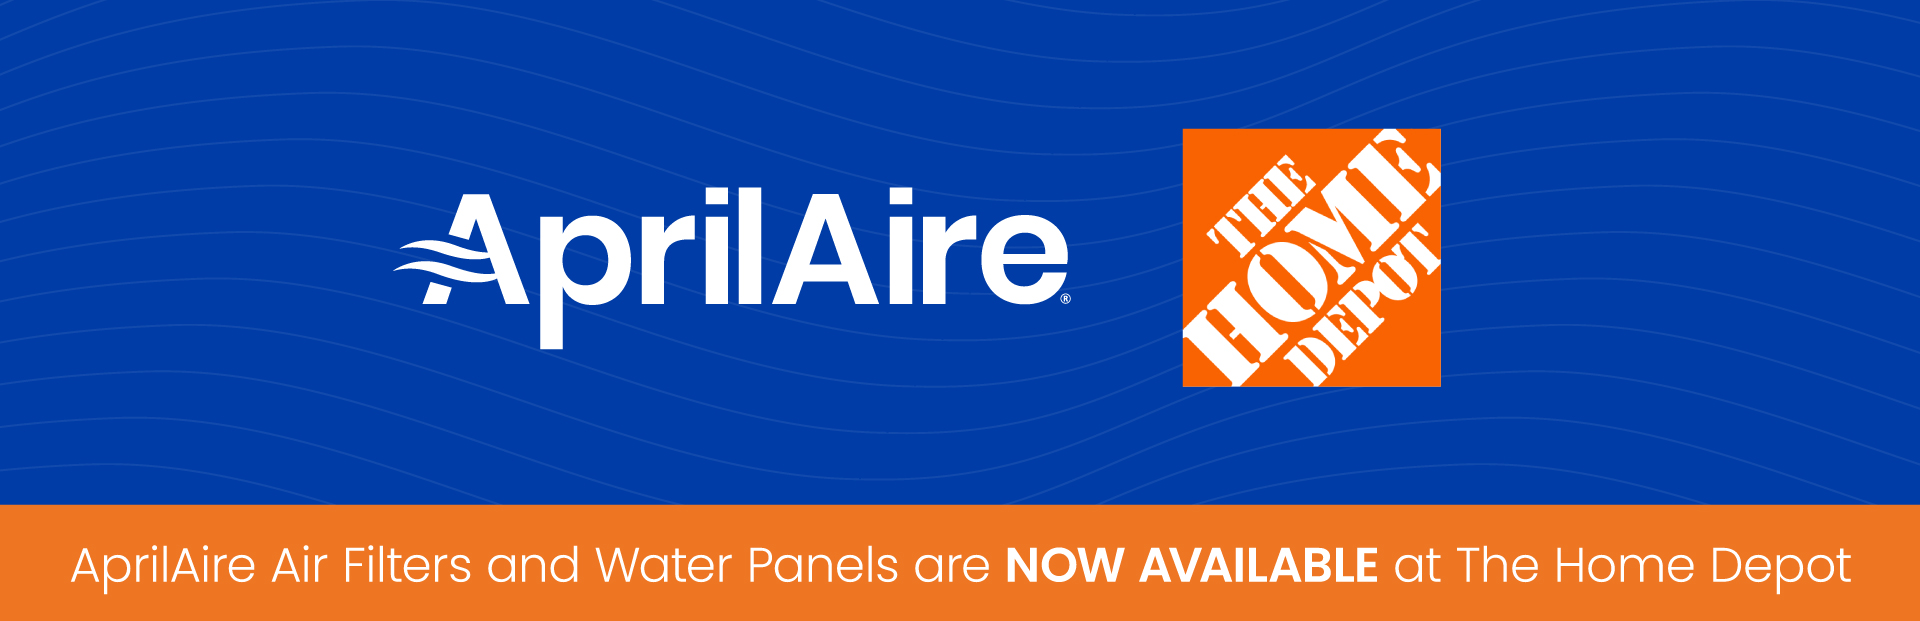 AprilAire Air Filters